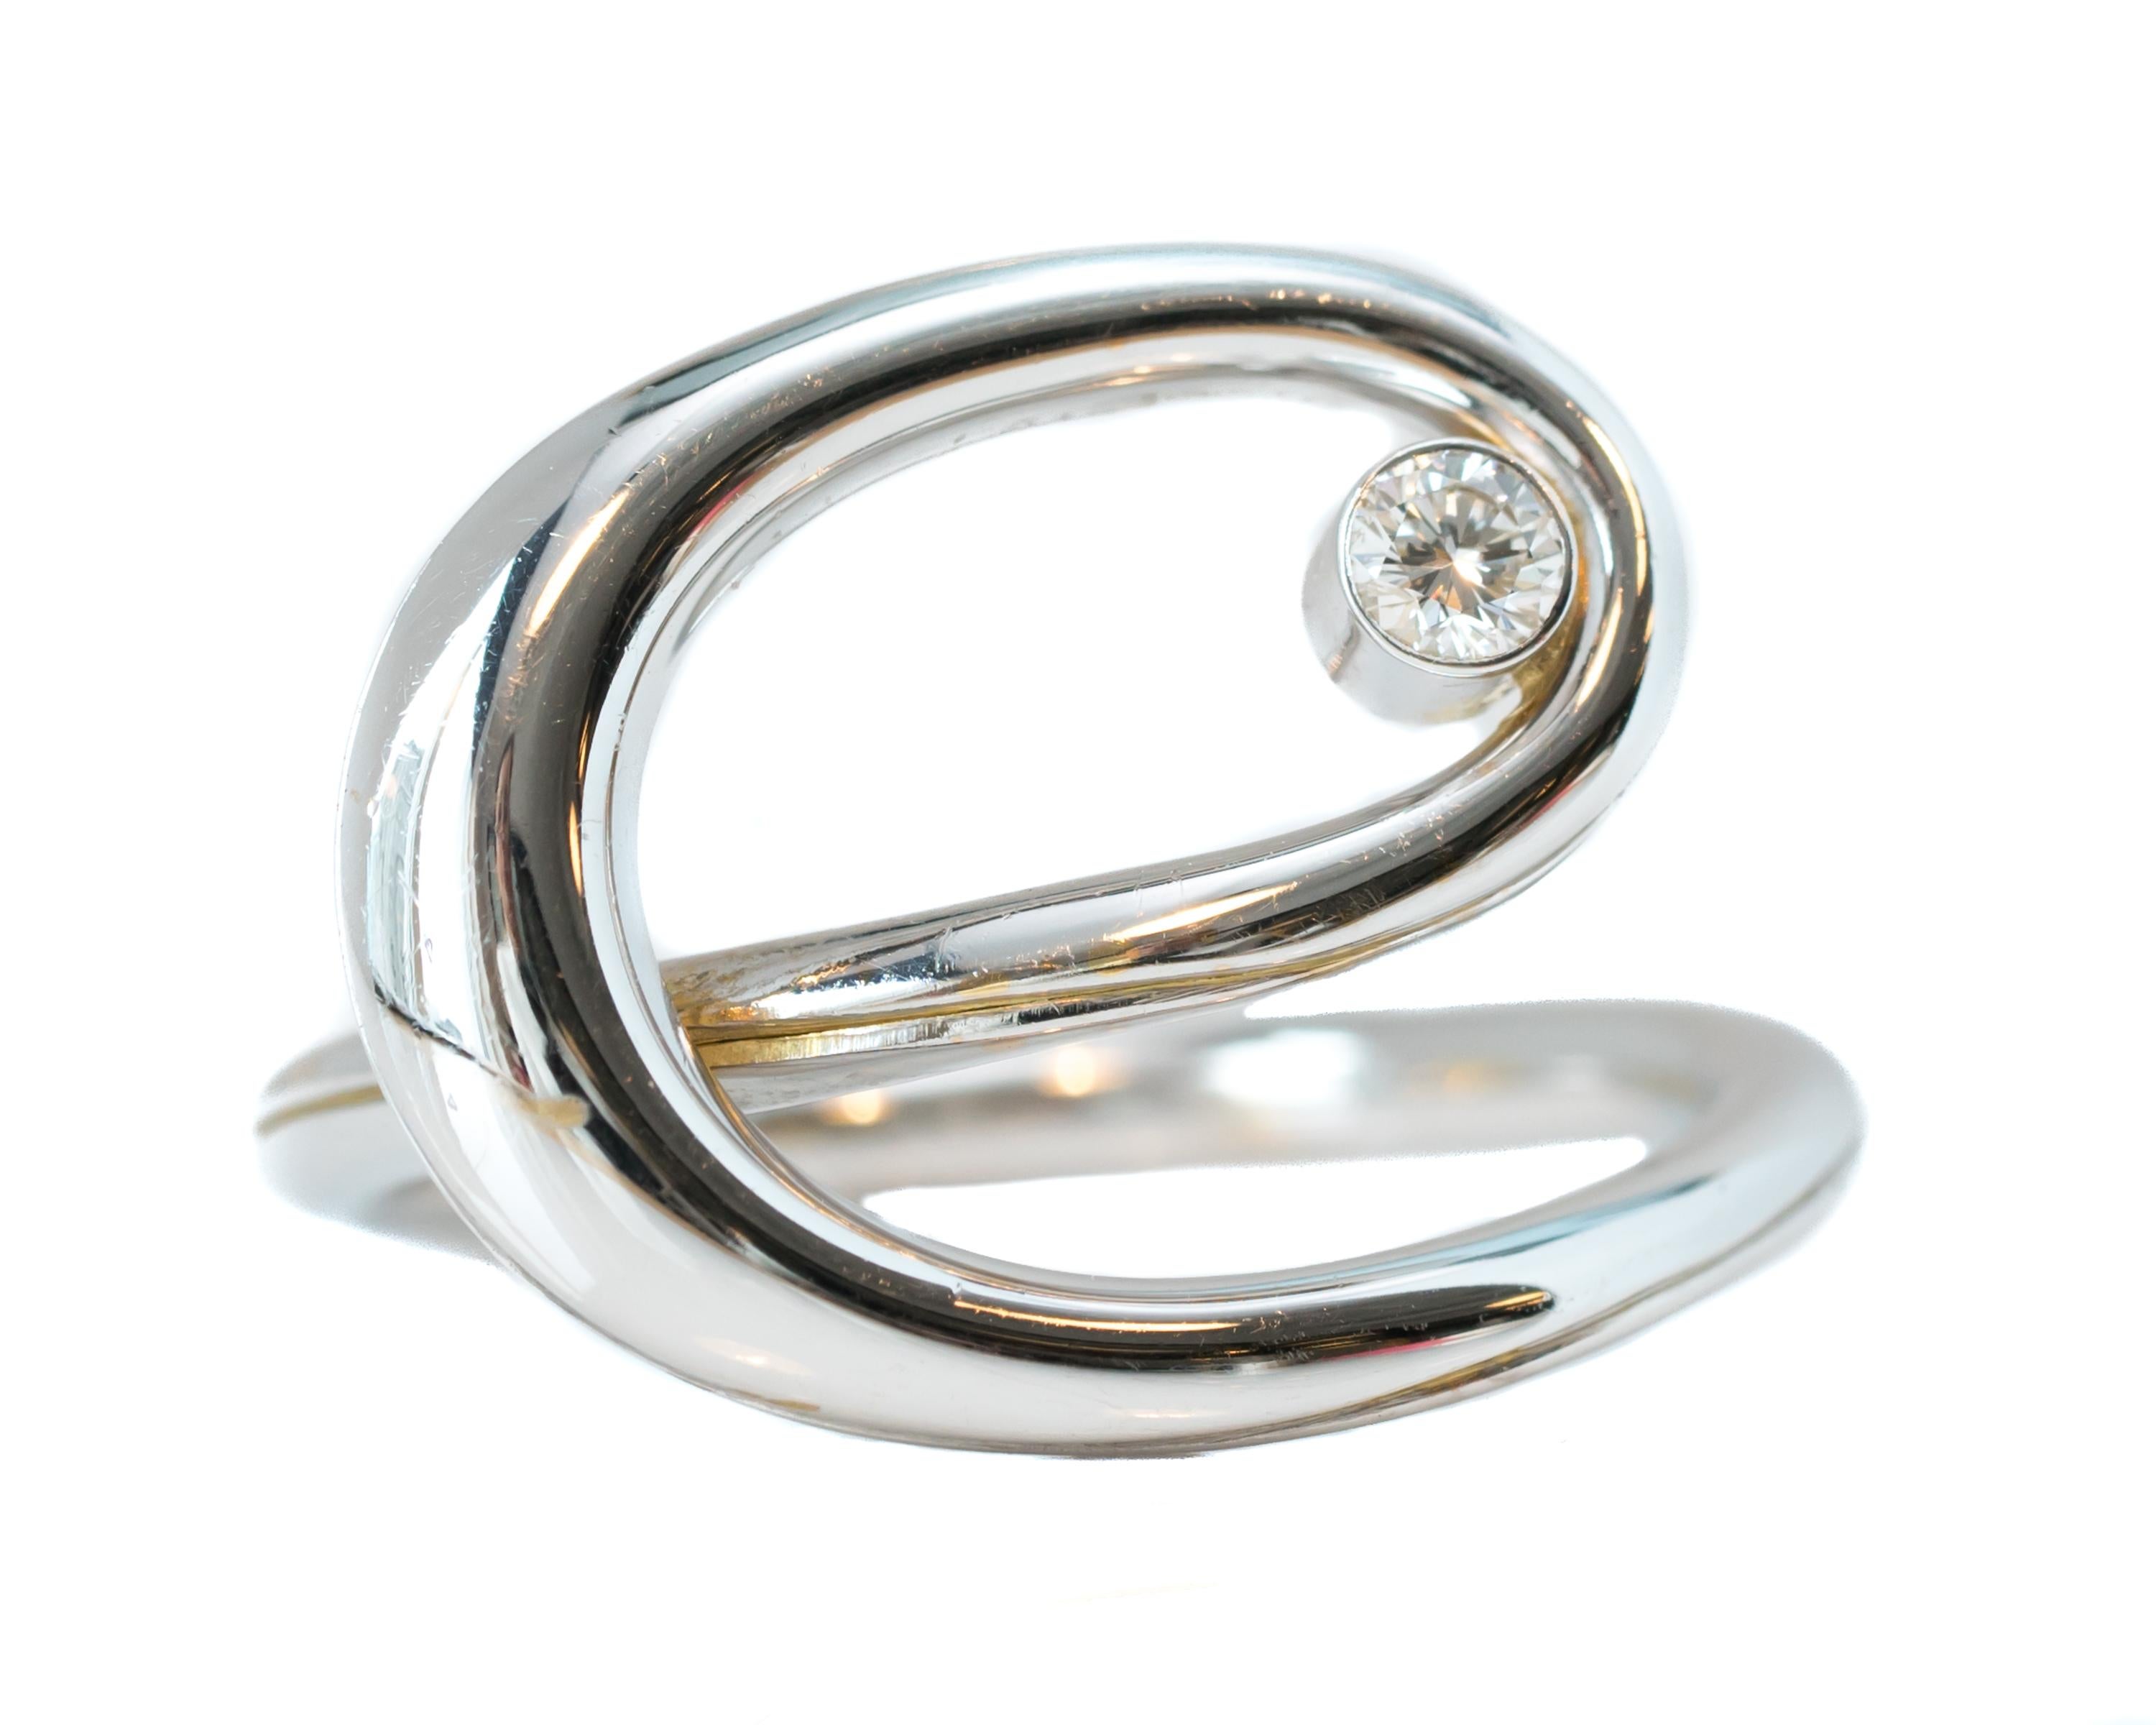 Diamond Swirl Infinity Ring - 18 karat White Gold and Diamond

Features:
0.15 carat Ideal cut Round Brilliant Diamond crafted in 18 karat White Gold. The diamonds are bezel set. 
Infinity Swirl Design - very Unique, Modern, Contemporary Design

Ring